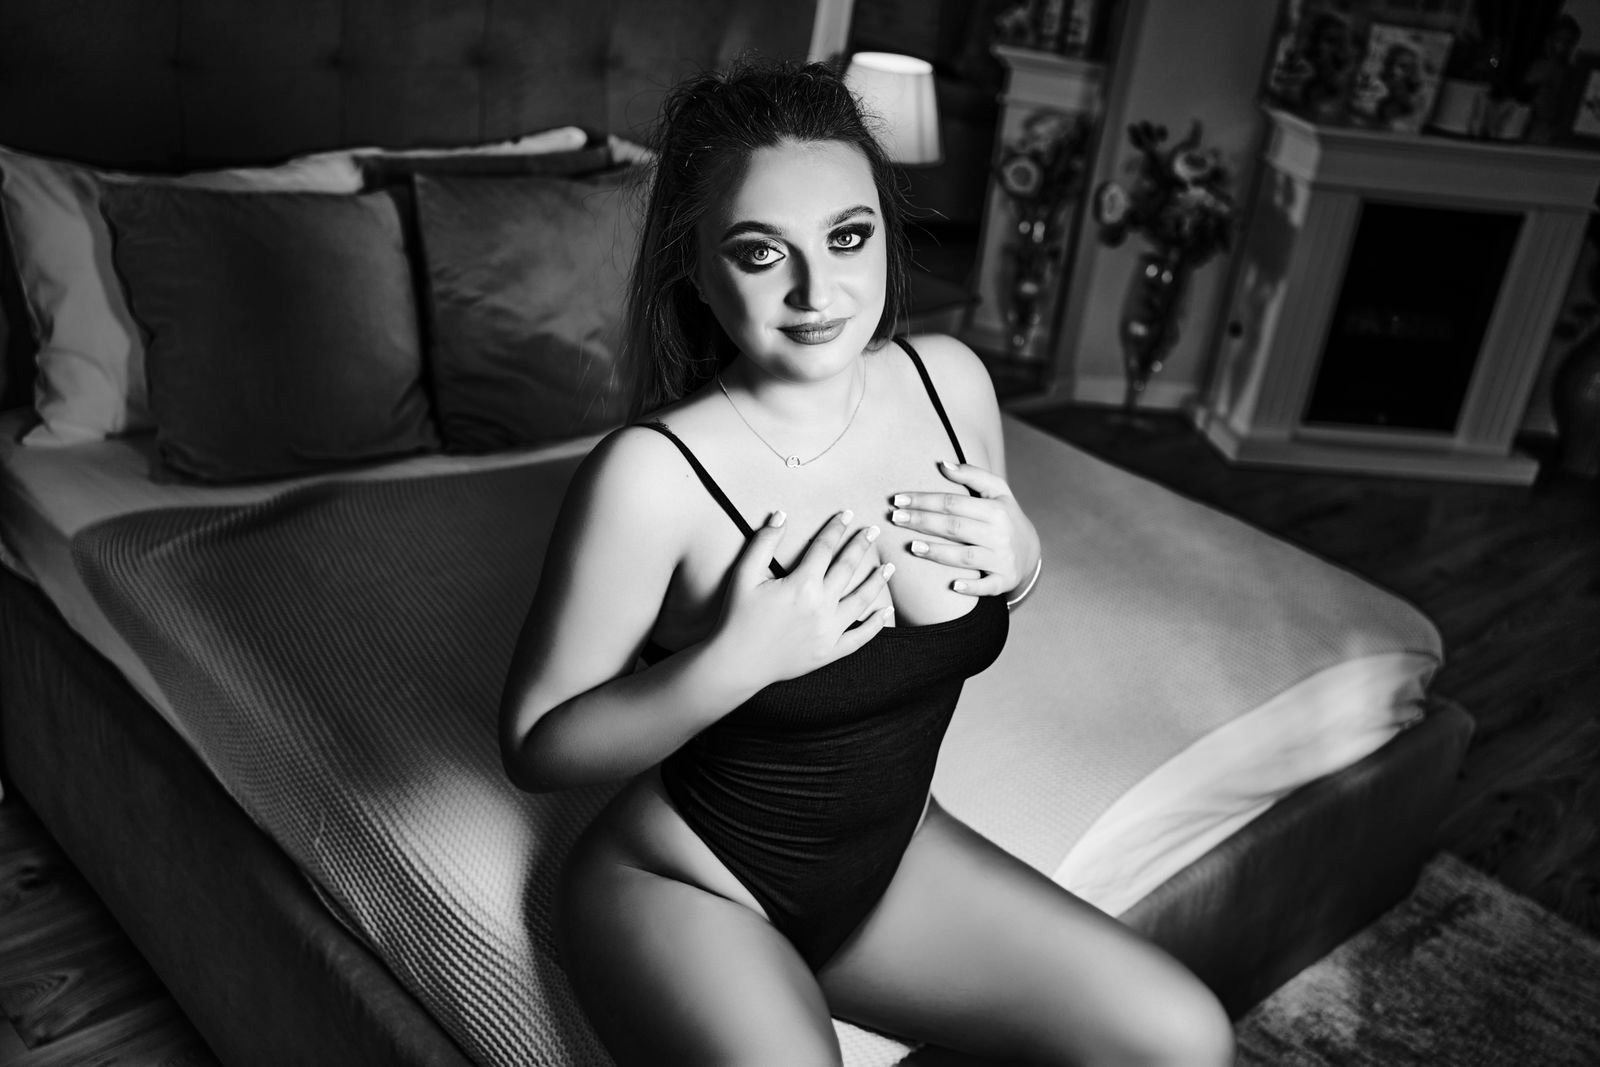 SkyPrivate live sex chat with LidyaBennet